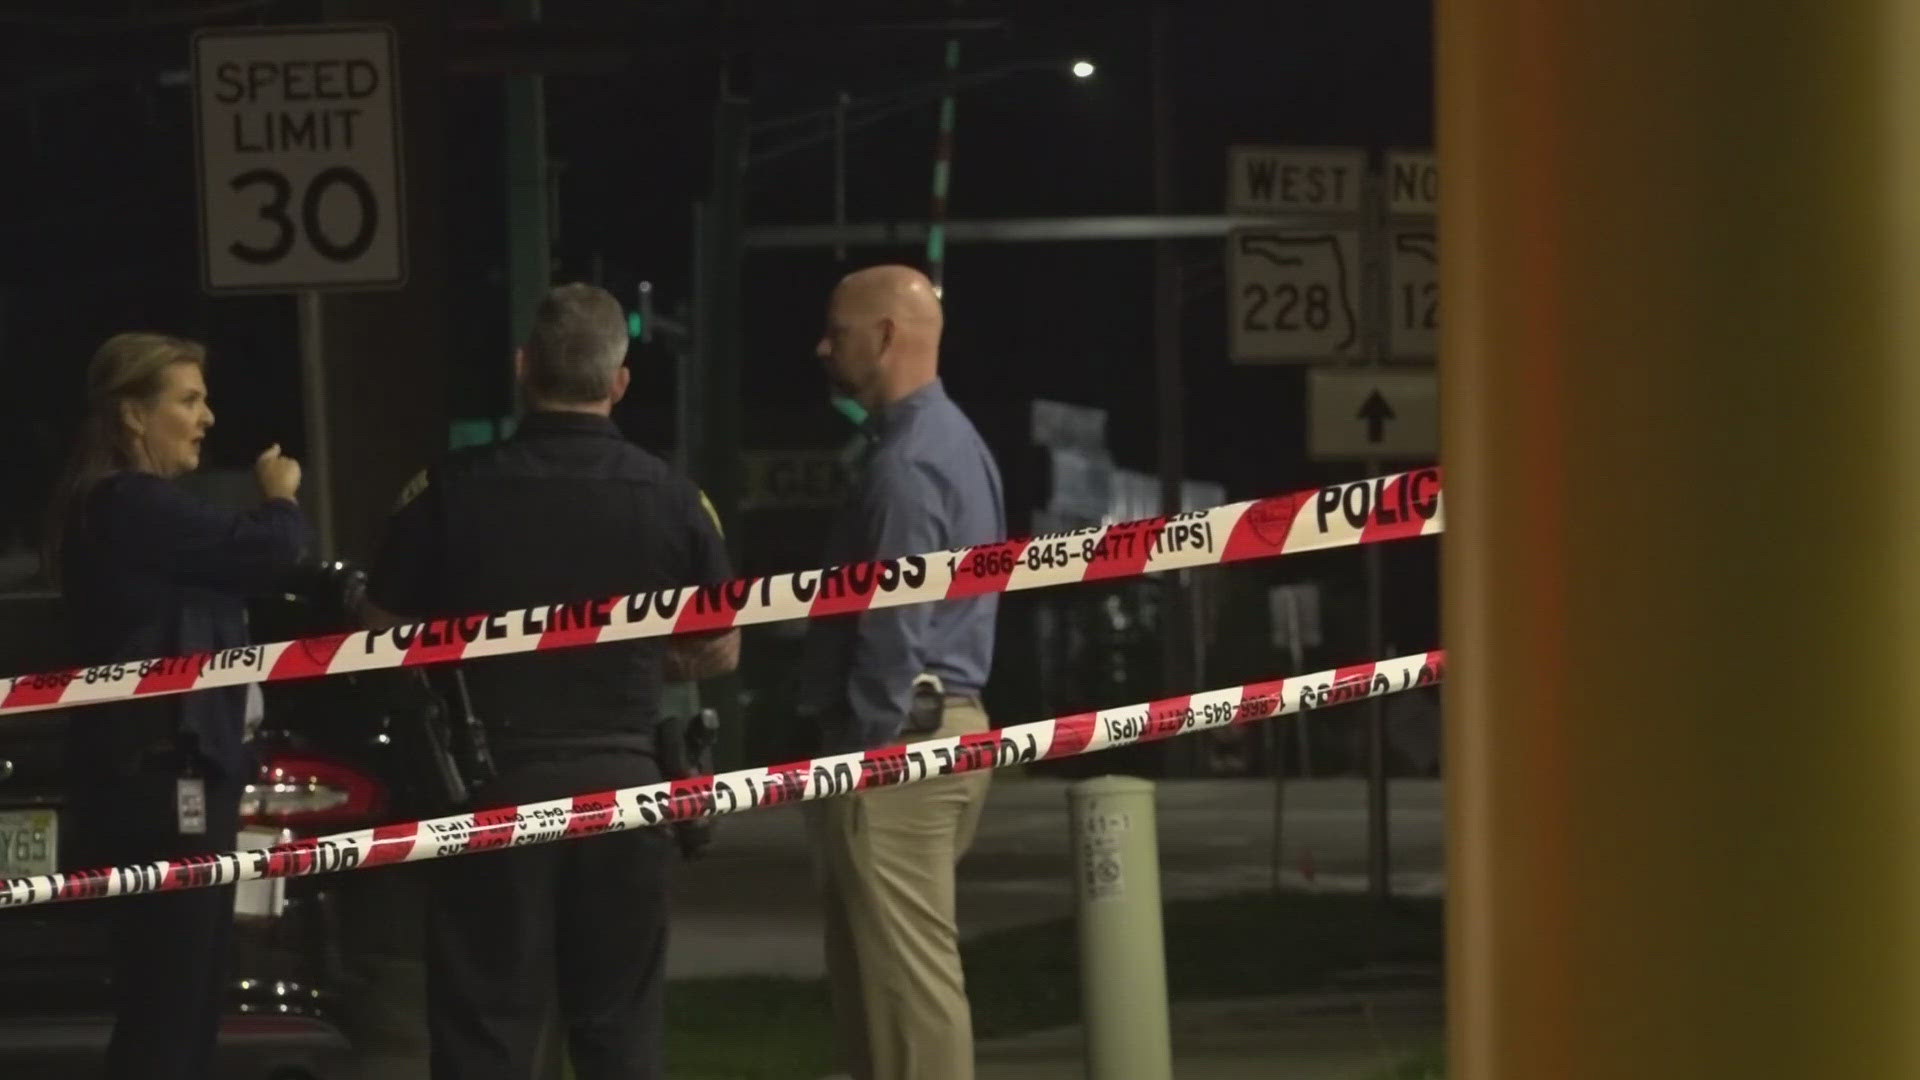 The Jacksonville Sheriff's Office says the first shooting injured a man in his early-20s, while the other shooting injured a woman in her 50s.